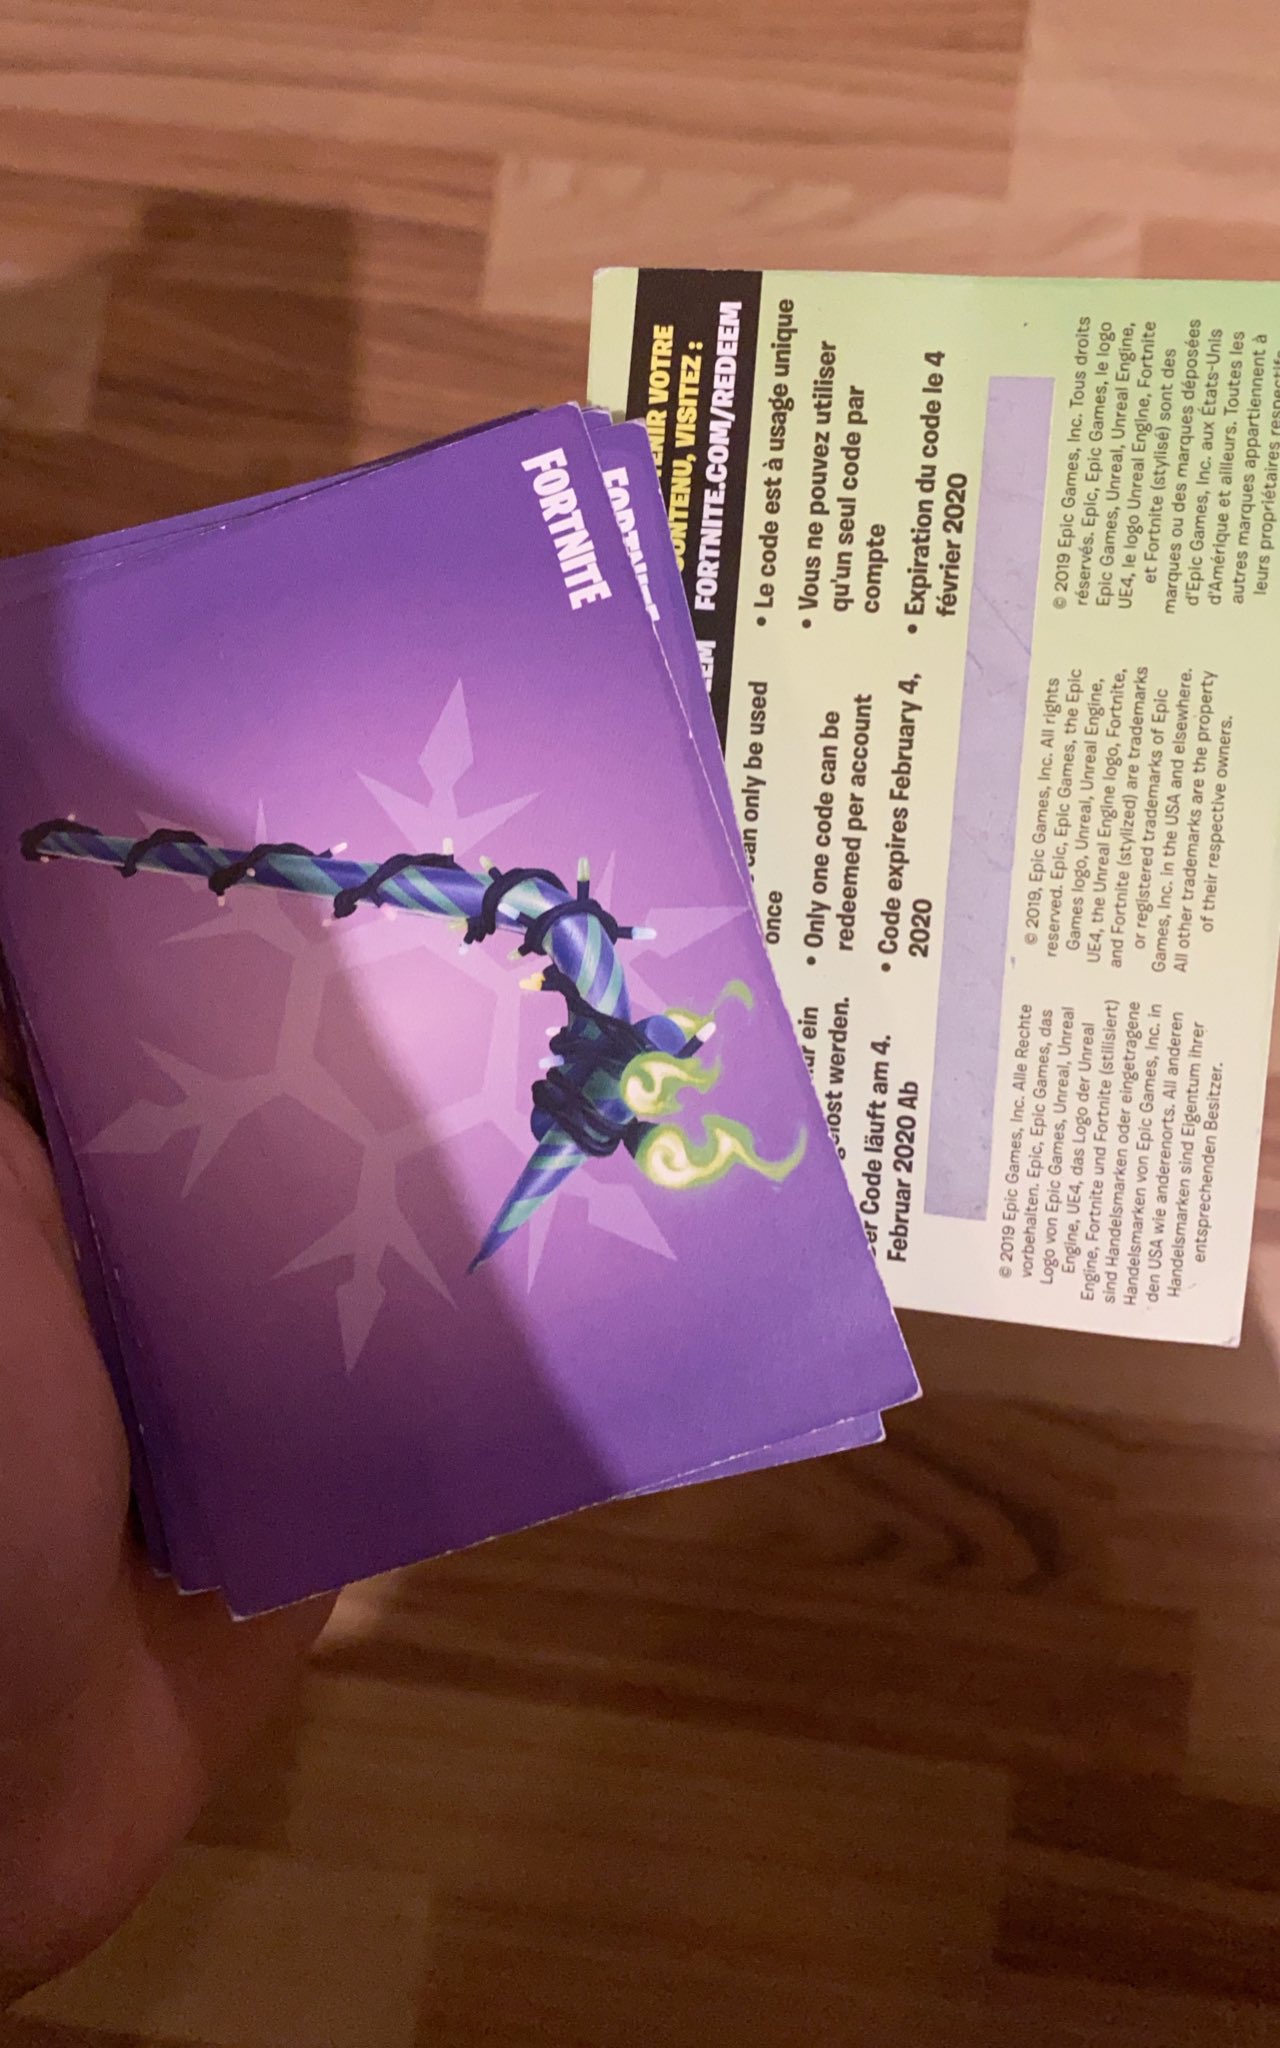 MintyCodes on X: FREE MINTY CODES / CÓDIGOS MINTY GRATIS ✓Like + RT and  follow + Comment your Fortnite ID! Say your Fortnite ID I'll dm some the  codes! ▶️Finish in 24h! #